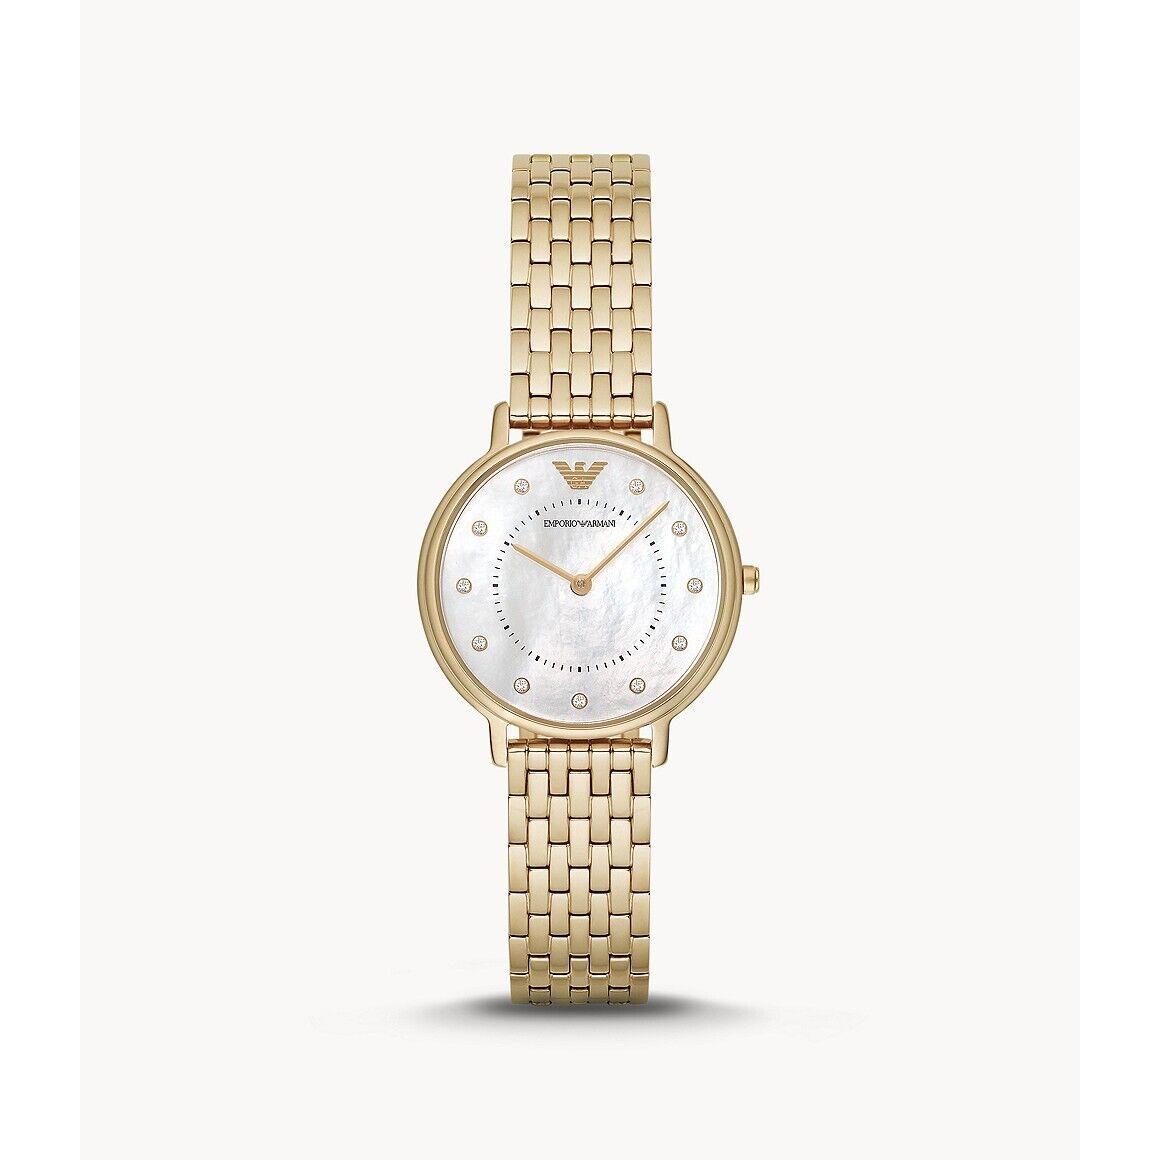 Emporio Armani Women`s Kappa Stainless Steel Analog Quartz Watch - Dial: White Mother of Pearl, Band: Gold, Bezel: Gold